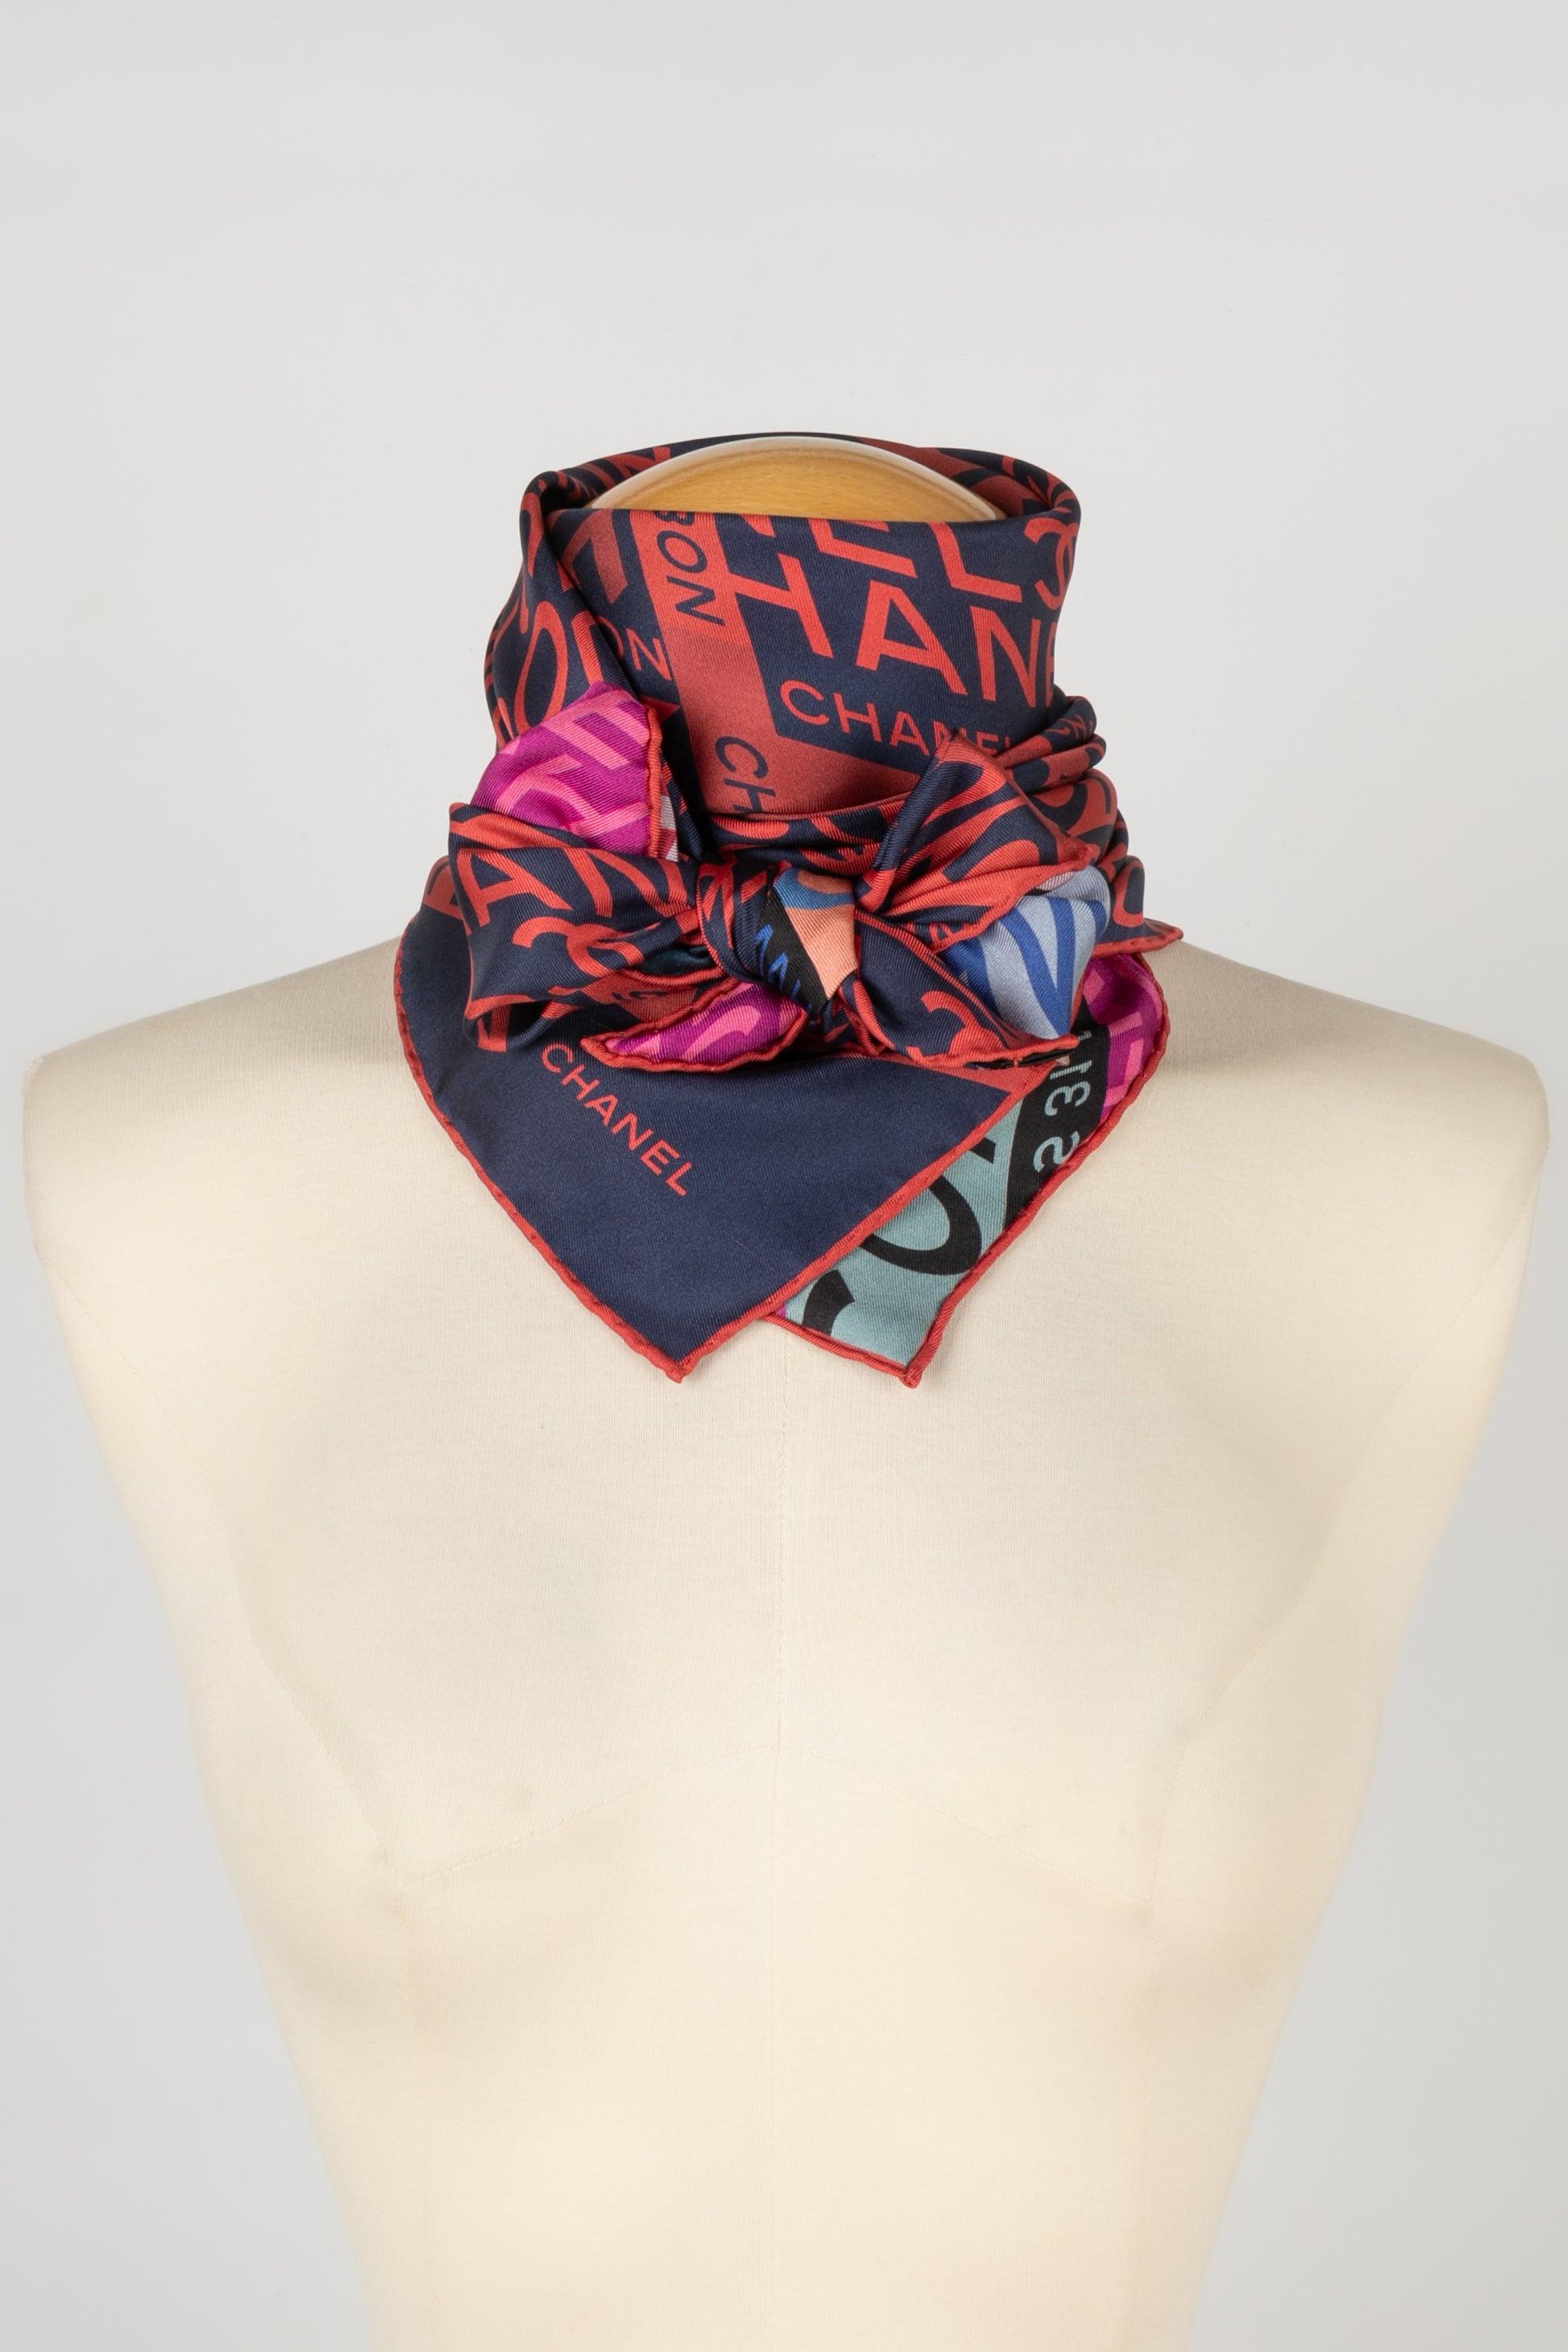 Chanel- (Made in Italy) Orange and navy blue silk reversible foulard.

Additional information:
Condition: Very good condition
Dimensions: 90 cm x 90 cm

Seller Reference: FFC25
